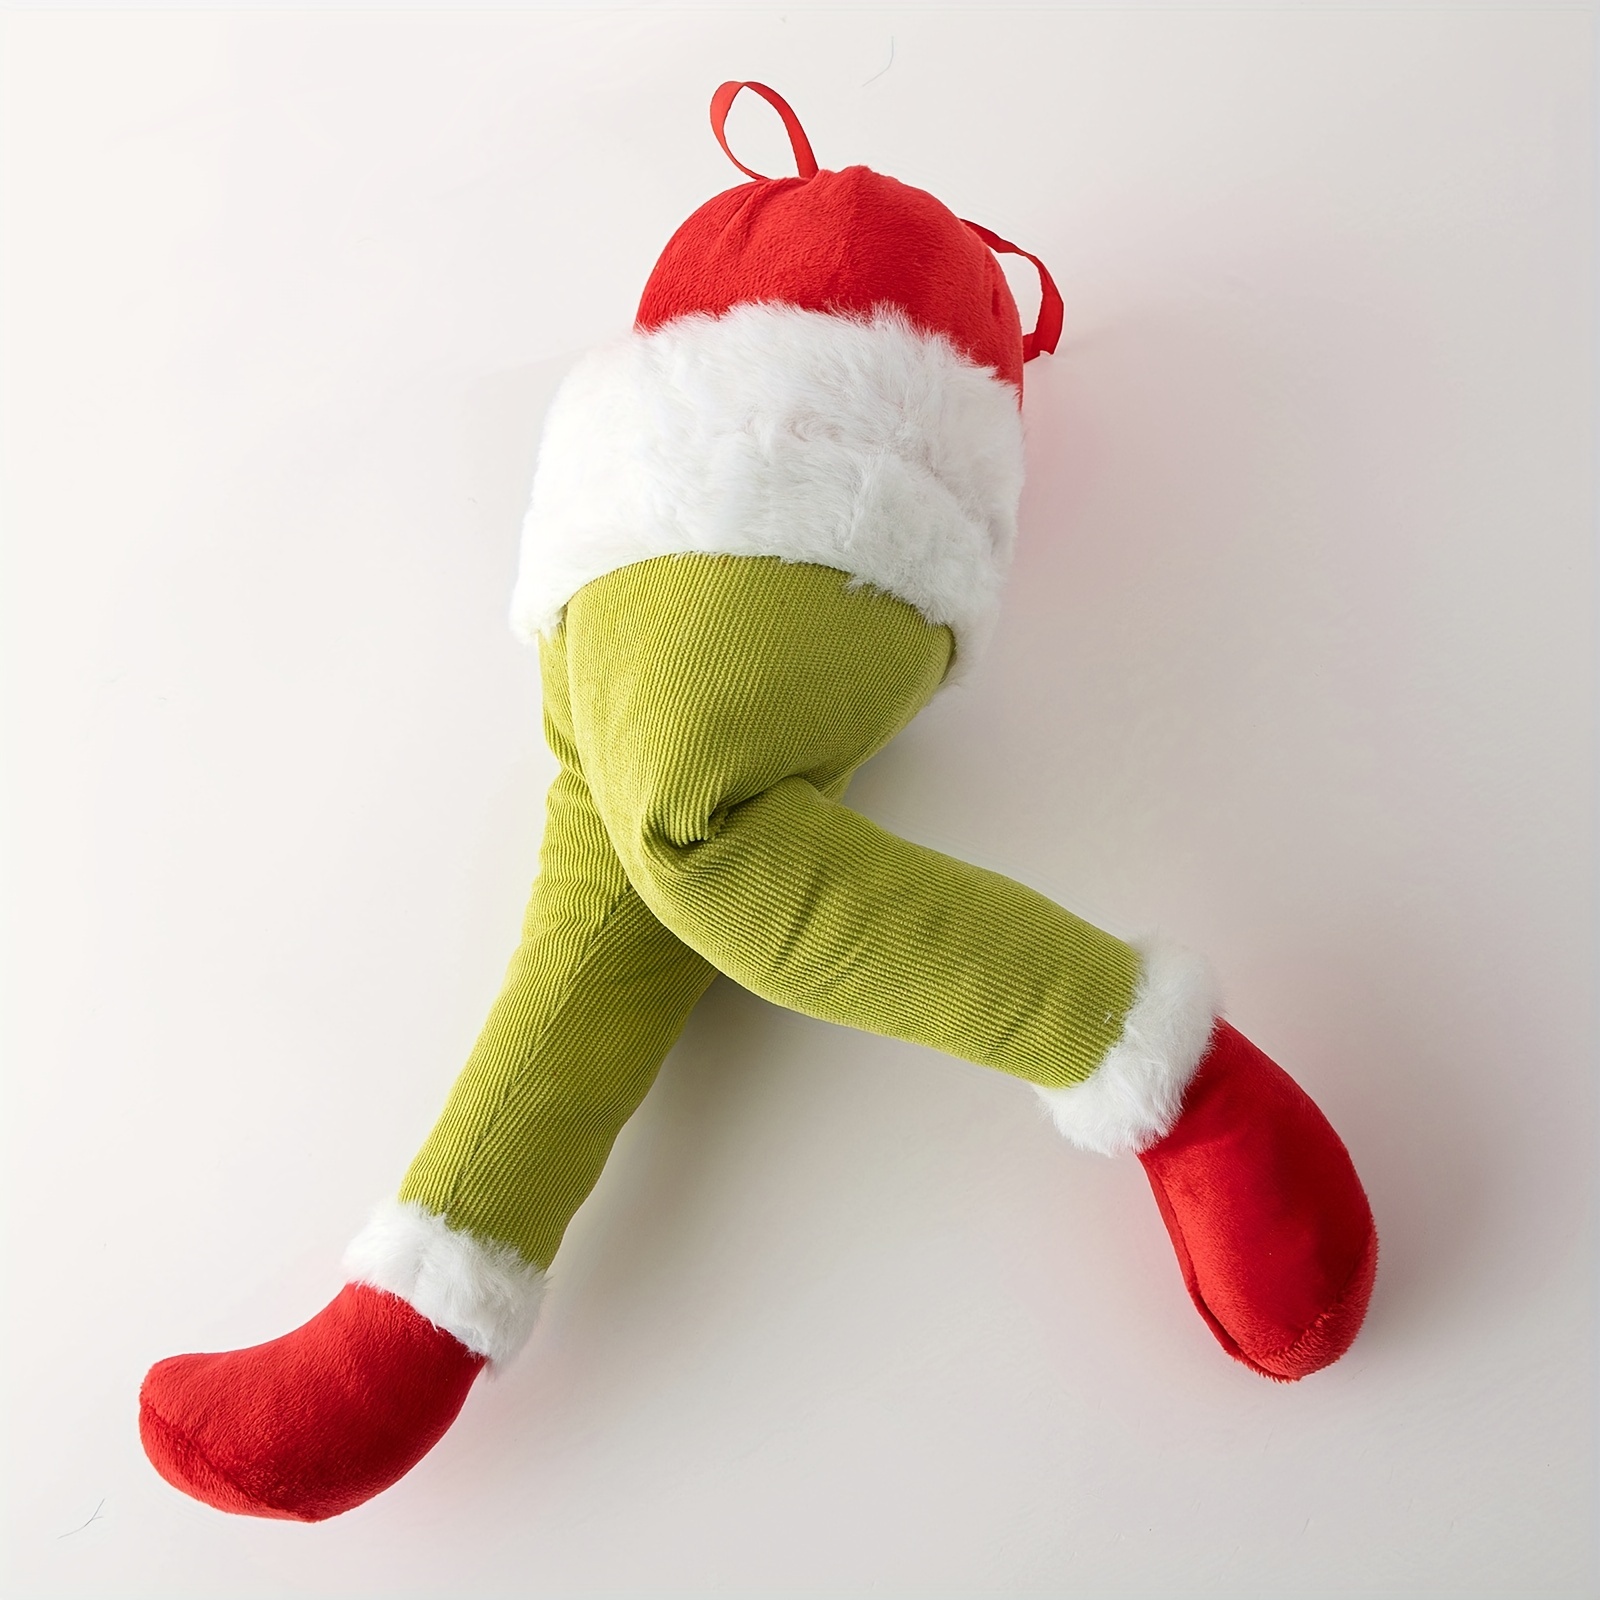  Christmas Elf Body Tree Decorations, Christmas Tree Decor Elf  Arms Stole Christmas Elf Stuffed Leg Stuck Xmas Tree Topper Garland  Ornaments Pose-able Plush Legs for Tree Ornaments (Arms+Legs) : Home 